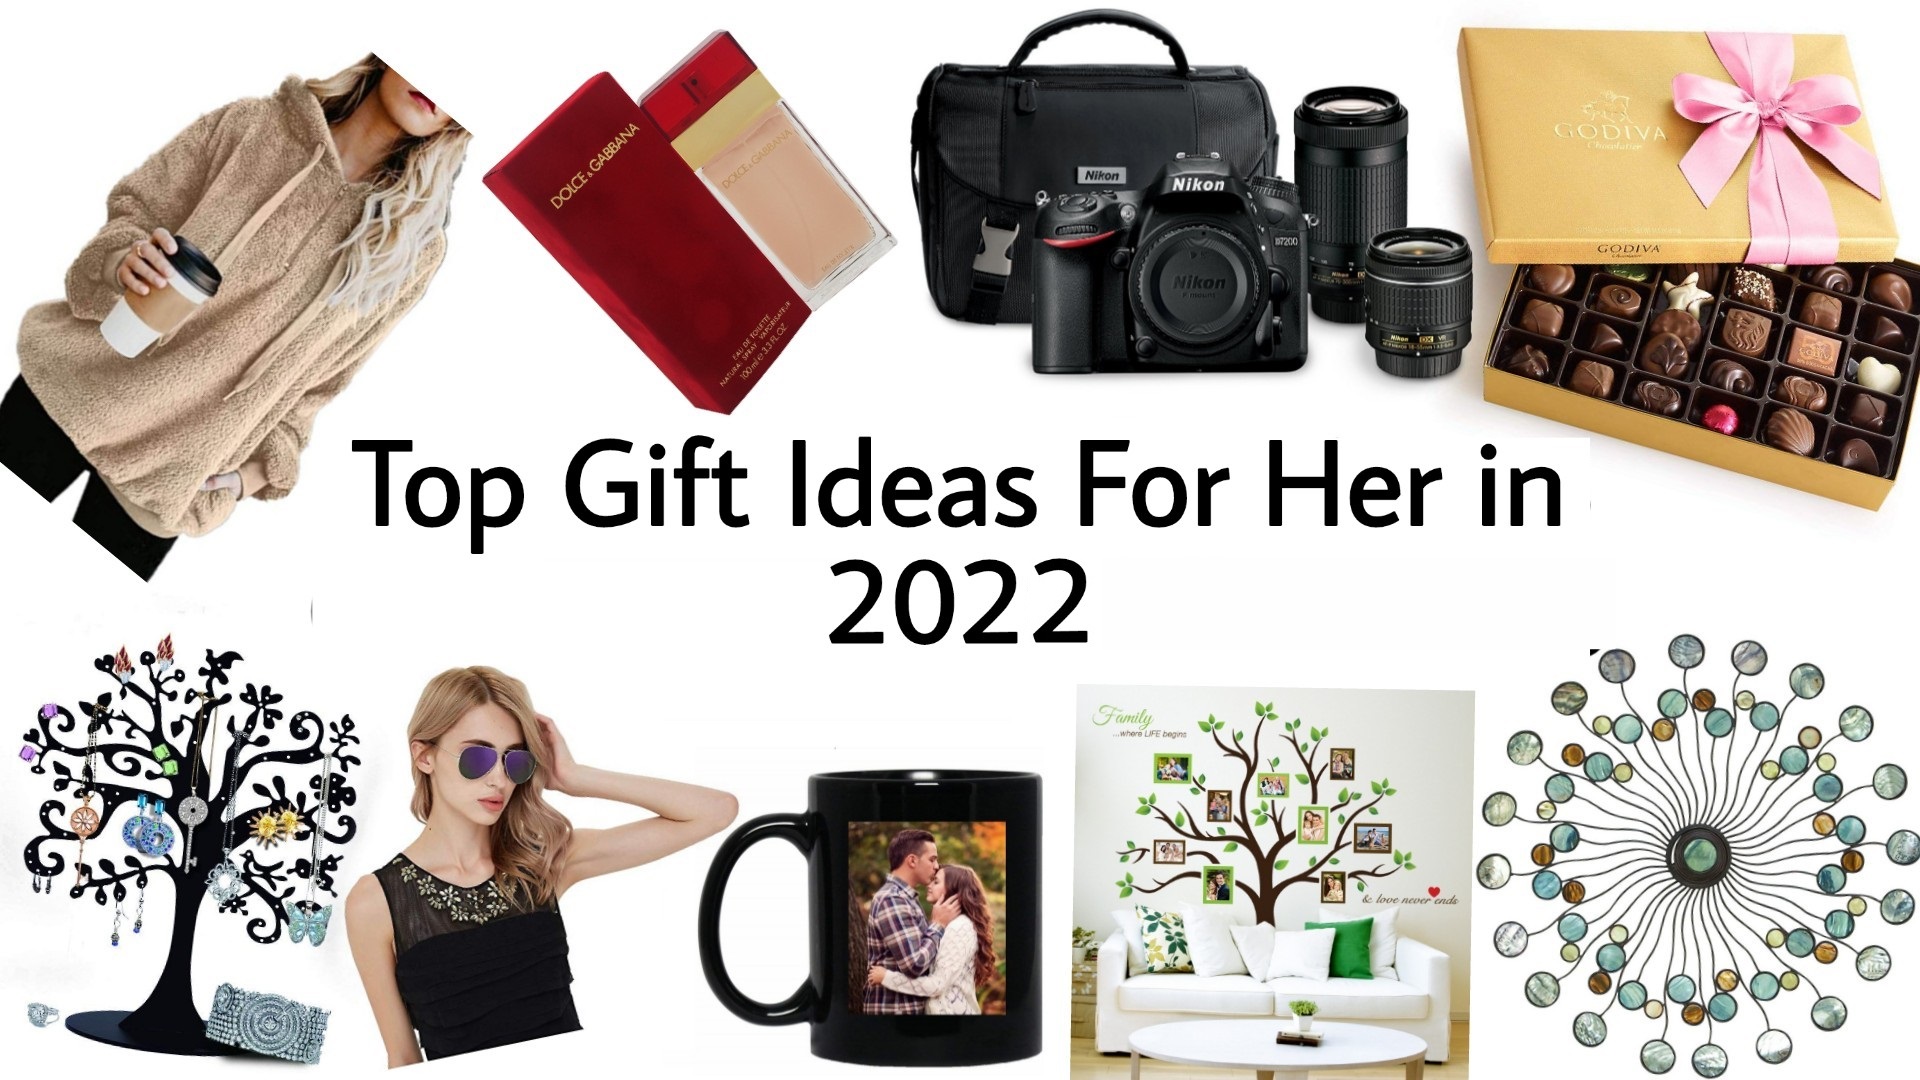 Top 10 Christmas Gifts for Her 2022 | Top 10 Birthday Gifts for Wife 2022